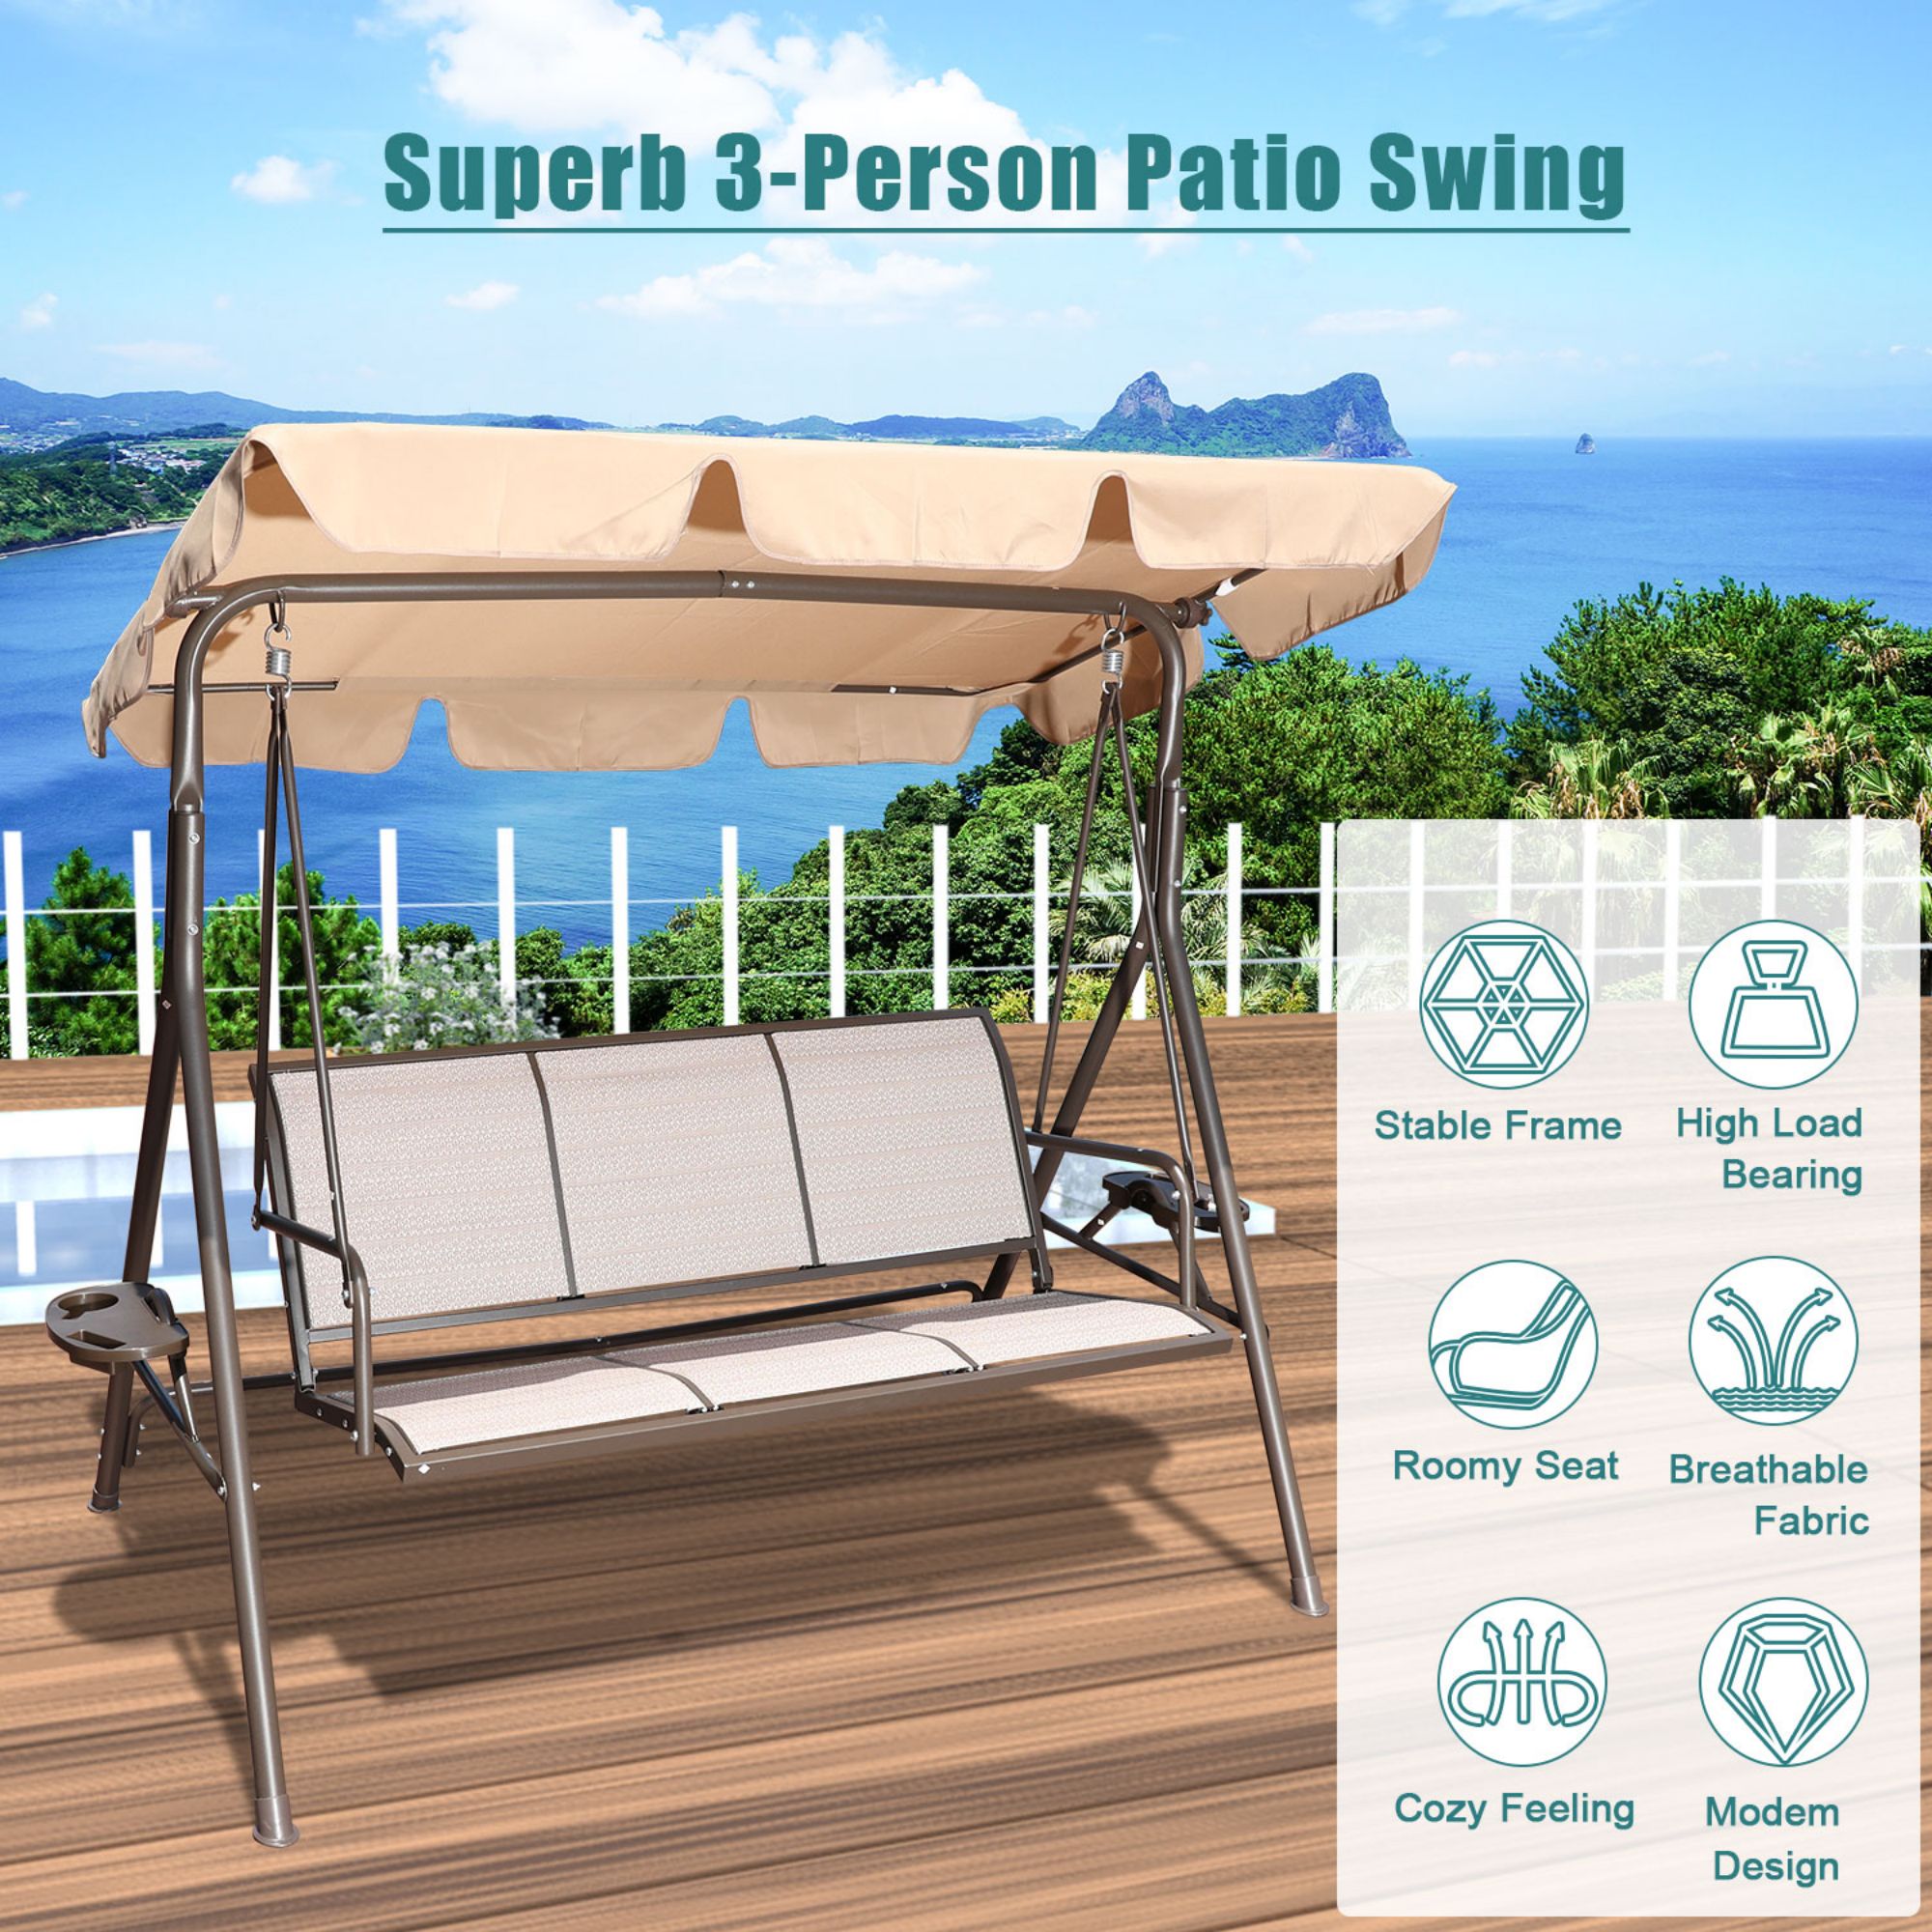 3 Person Beige Patio Swing Seat with Adjustable Canopy, All Weather Resistant Hammock Swinging Chair Bench - image 2 of 11